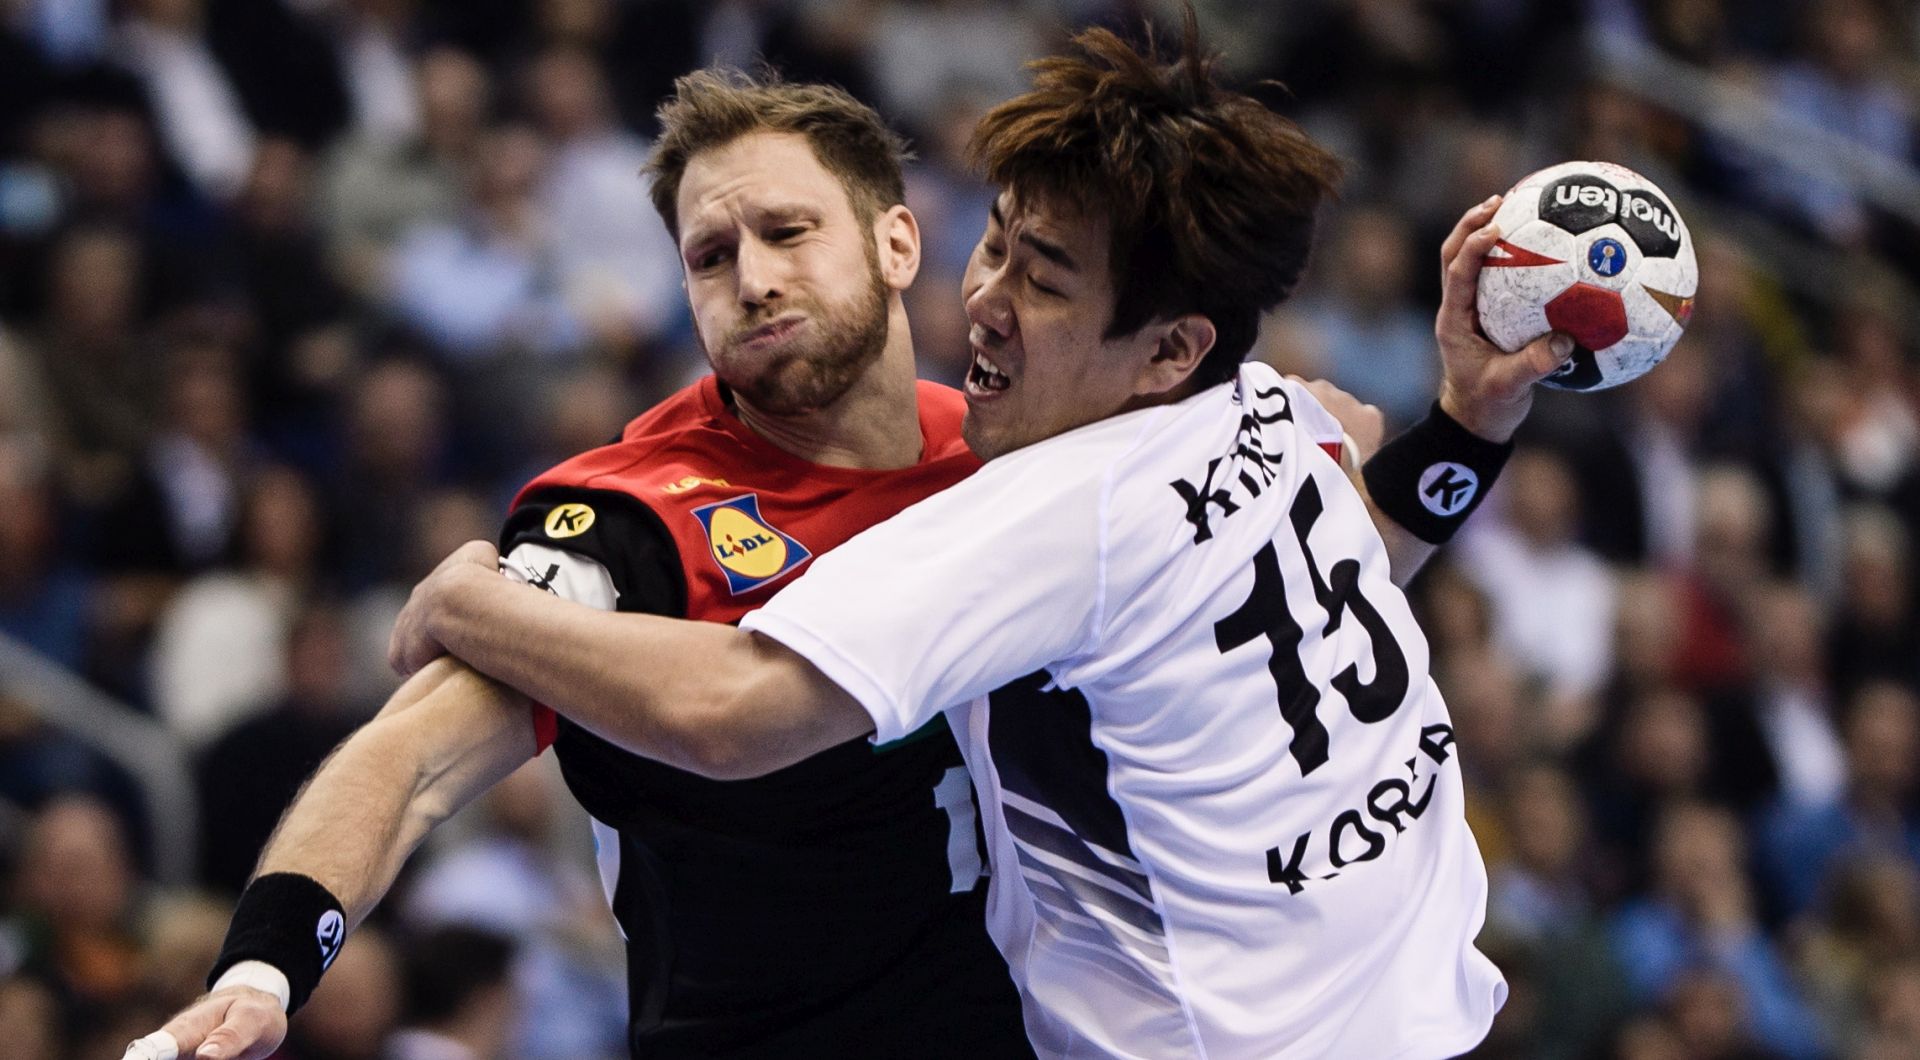 epa07273700 Steffen Weinhold of Germany (L) in action against Kim Dongmyung of Korea during the match between Germany and Korea at the IHF Men's Handball World Championship in Berlin, Germany, 10 January 2019.  EPA/CLEMENS BILAN